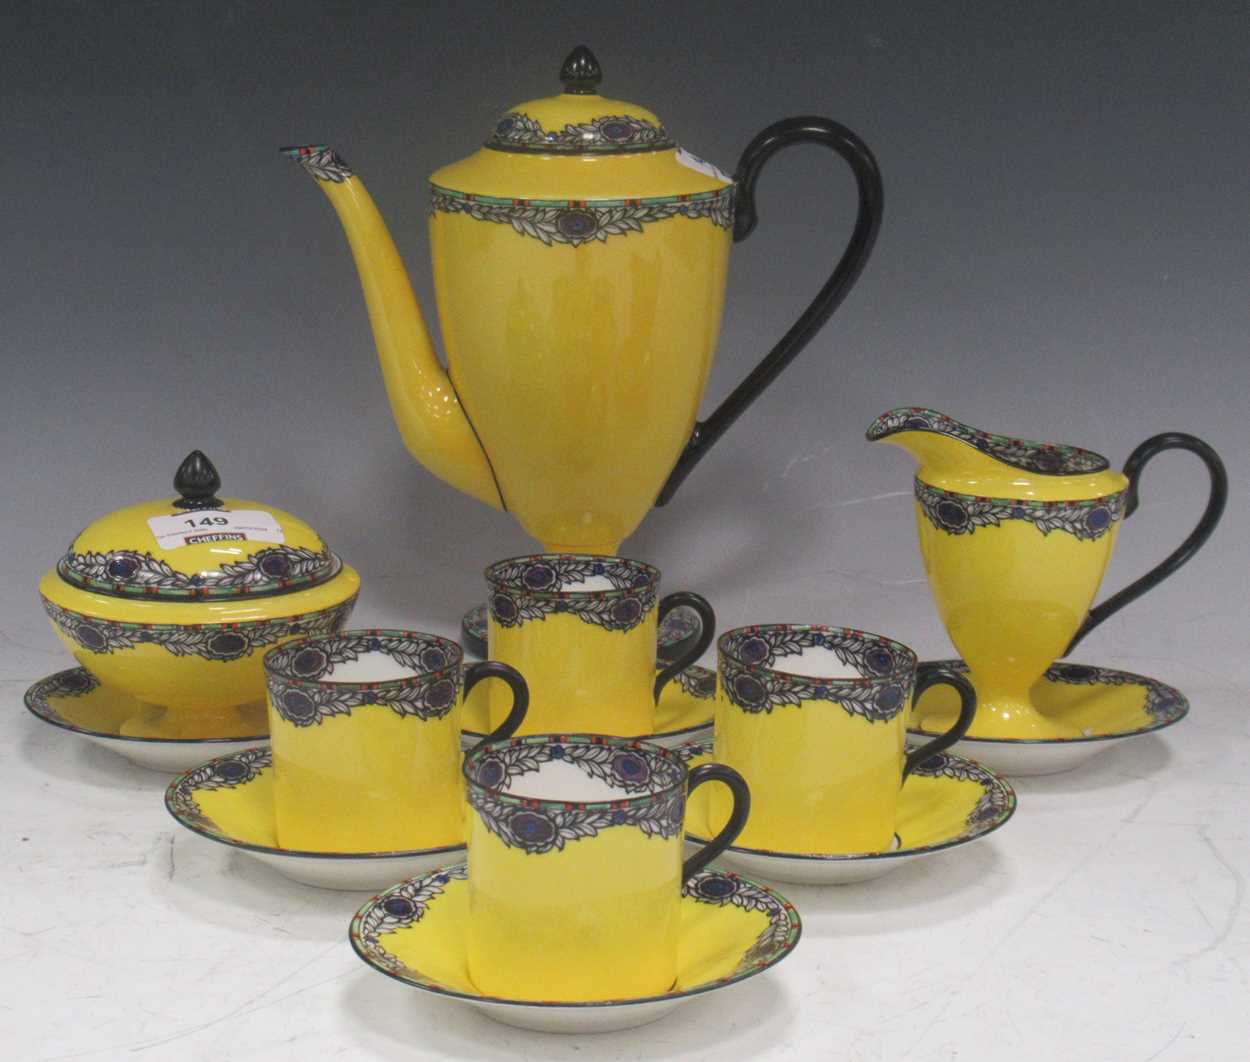 Circa 1900 coffee set, the bright yellow ground decorated with a rim of swagged stylised floral